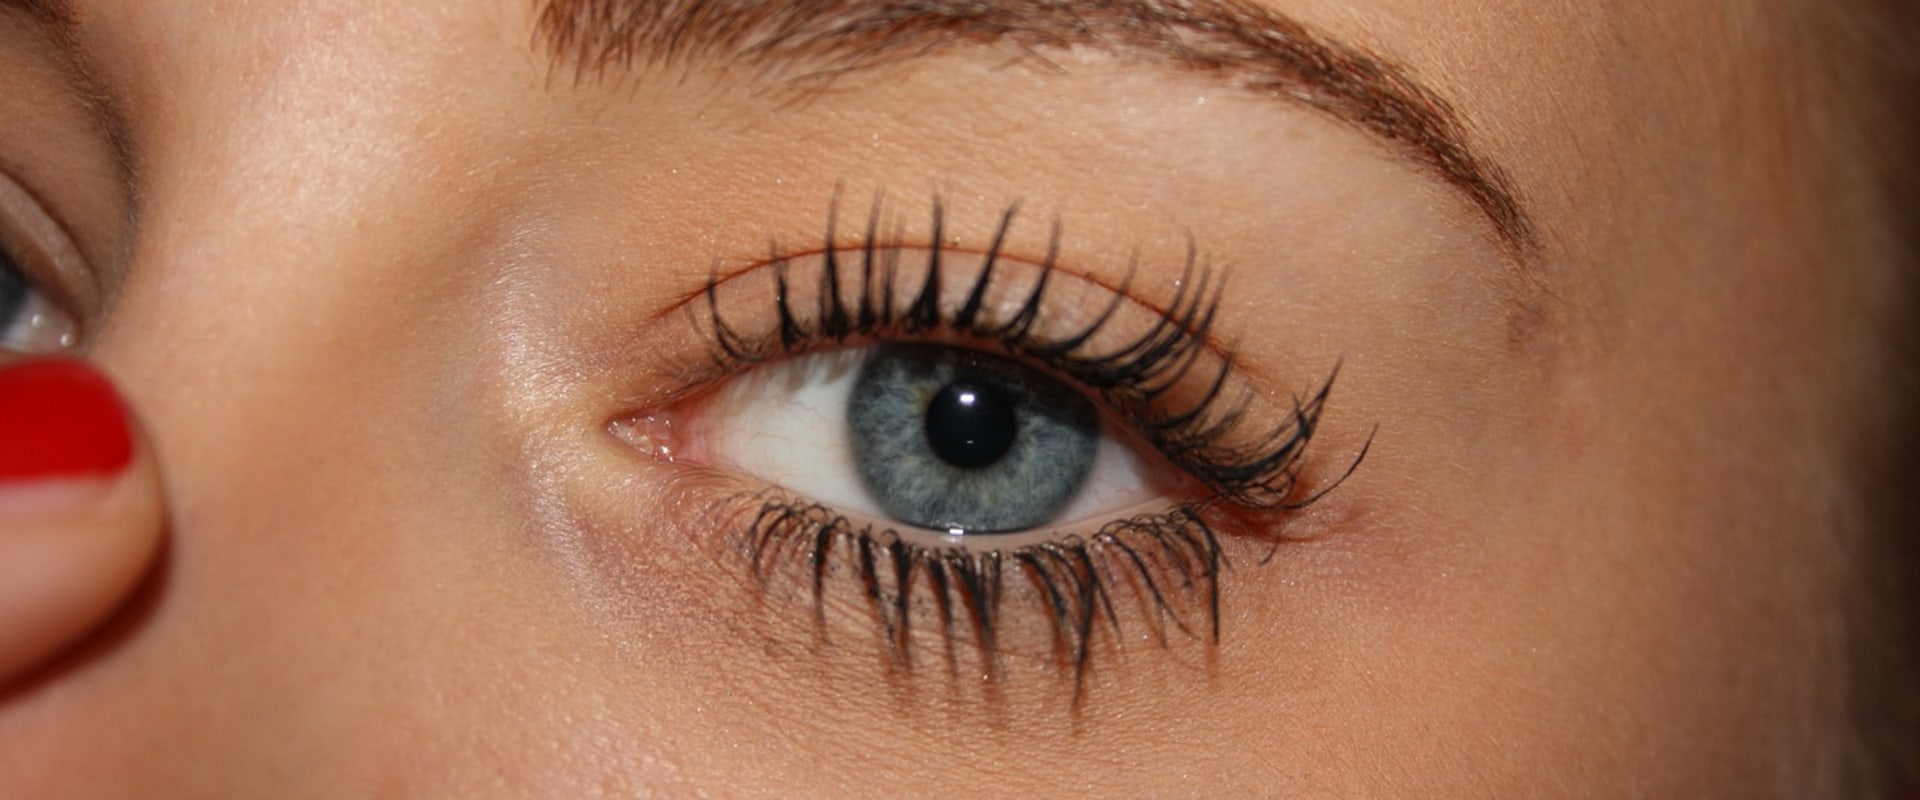 Is permanent eyelash extensions safe?